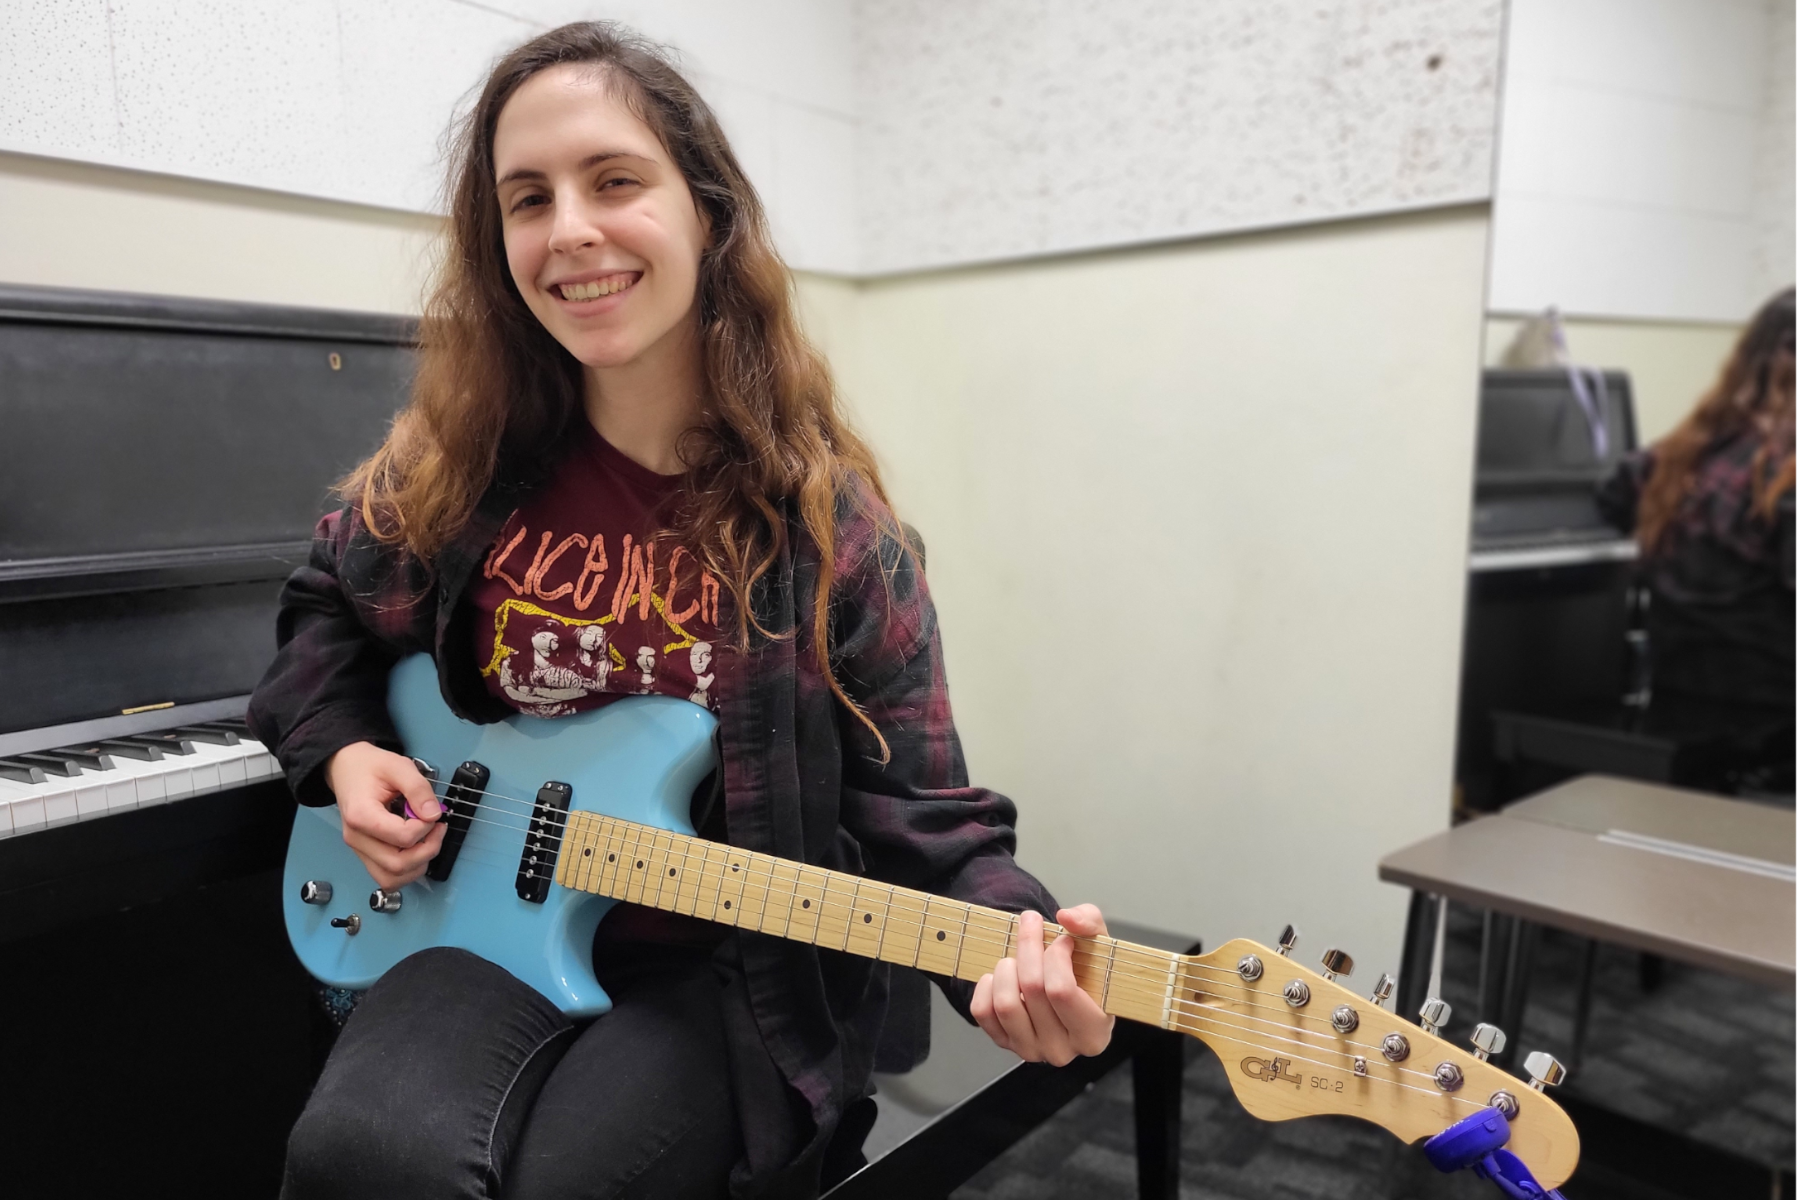 Layla Burkhouse seated in music practice room, playing electric guitar